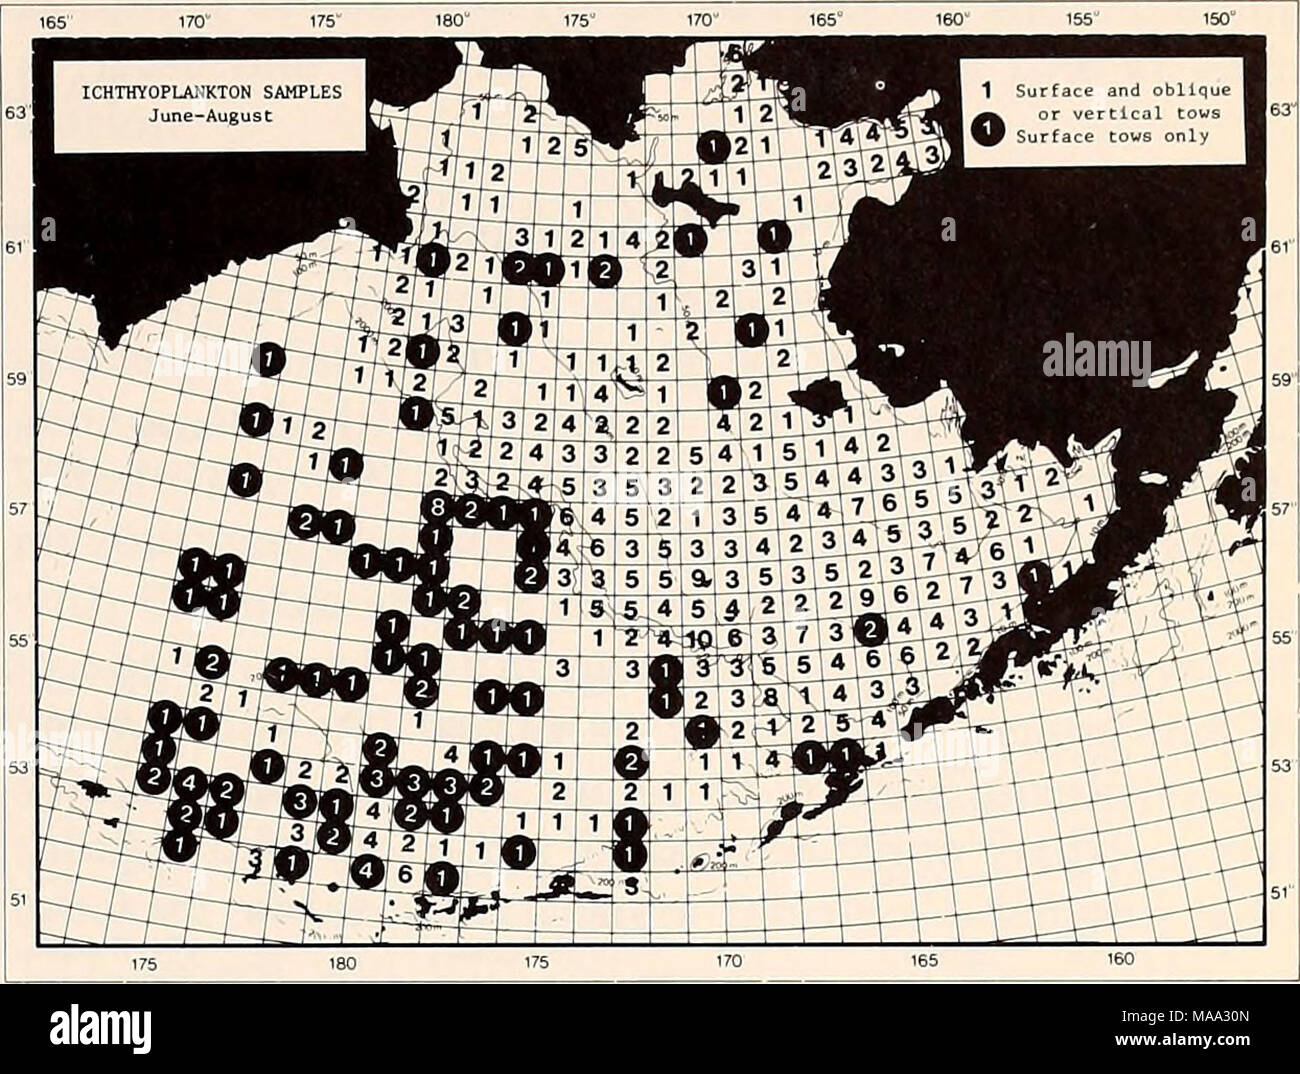 . The Eastern Bering Sea Shelf : oceanography and resources / edited by Donald W. Hood and John A. Calder . Figure 30-3. Number of stations at which ichthyoplank- ton samples have been collected in summer, June-August. 1 ICHTHYOPLANKTON SAMPLES WK^T- 5 ? 1 1 1 11 6 H Uecember-February UTt-Lh-i 1 ^&quot; ^^^^B* tâ. KTTrn^ - - -1 +44-1^ 11 ^^^^^^^^^^^^^^^HmLj rttTT&quot; ^ k* Xh-h^I^^^ ^ -^^^^^^^^H ' ^ 1 ,&gt;1^^^^^W^Â» 1 -1 4-t{^^HiiiiiMI-' 'f^tjjiJif!^^ ^' â ^^, i T-4-sriT-i^^ ^ ^ 1*-L^r^^^^B^H^ 7 |i|i â *, ' -T wrnj^^^^^Rr 5 31 2 U -44-HTmprmBrl ^ .'^1 1 ' 44-FHAxi+-^Klll ' ^X Stock Photo